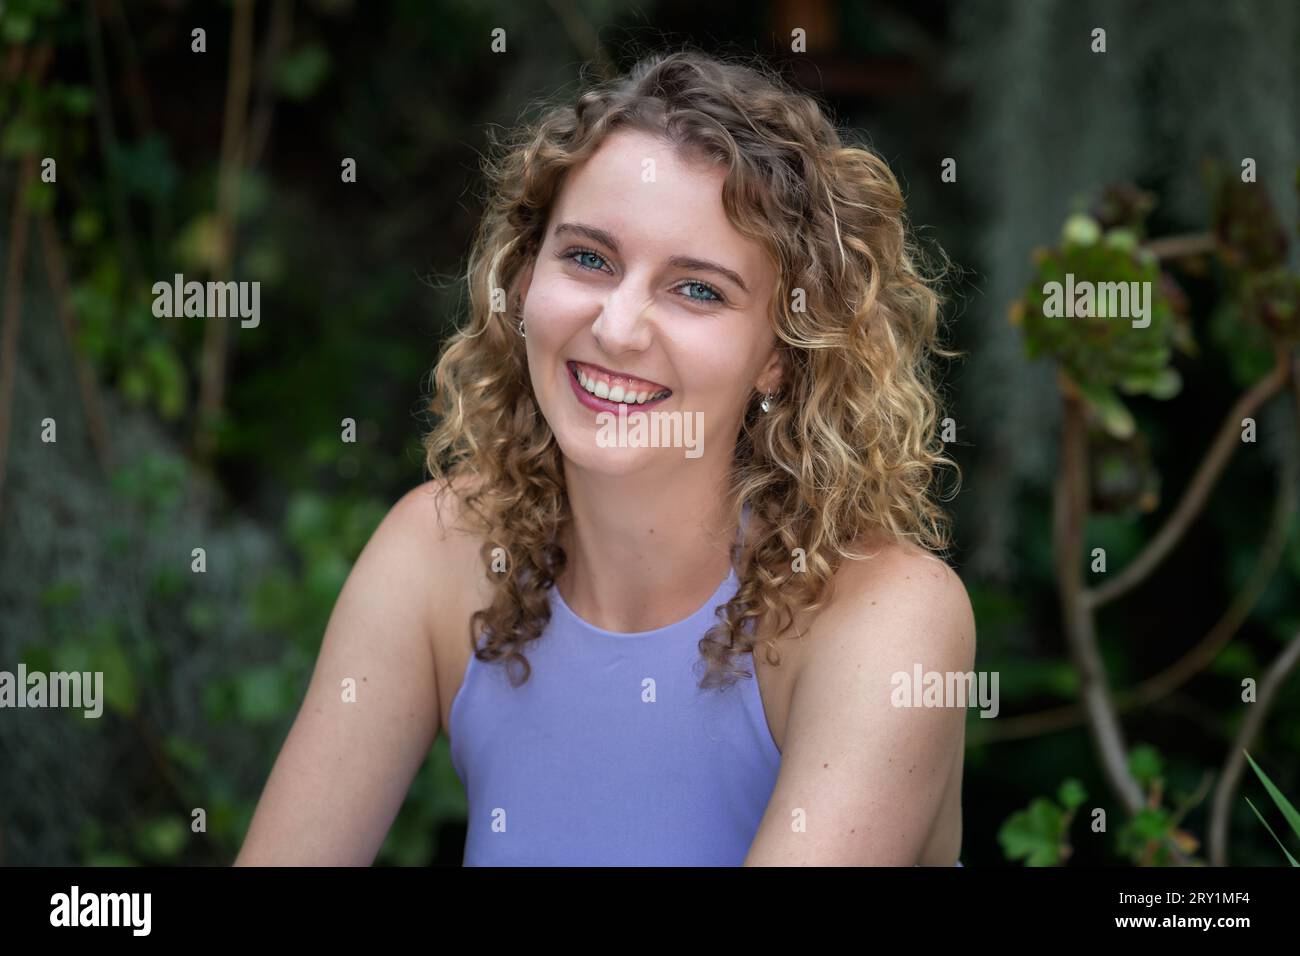 Head and shoulders portrait of a smiling, young Caucasian woman with curly blonde hair and blue eyes, outdoors in Summer Stock Photo